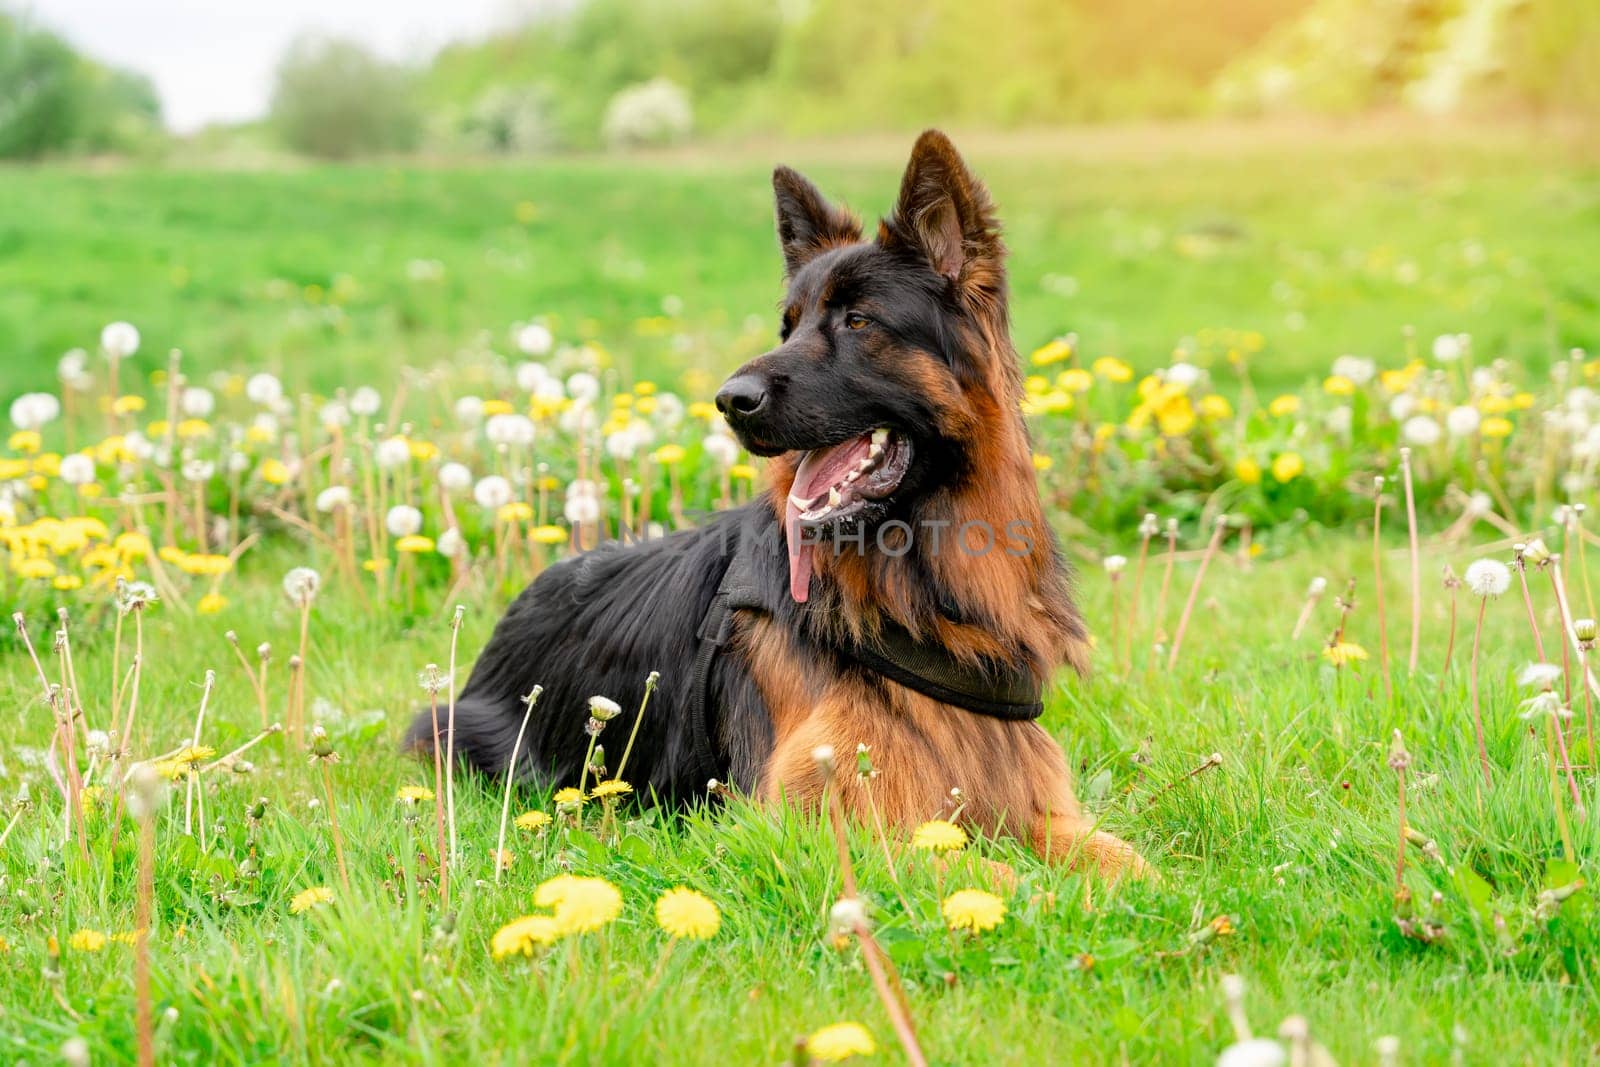 German shepherd dog in harness out for a walk lying, running, walking on the grass in sunny summer day by Iryna_Melnyk